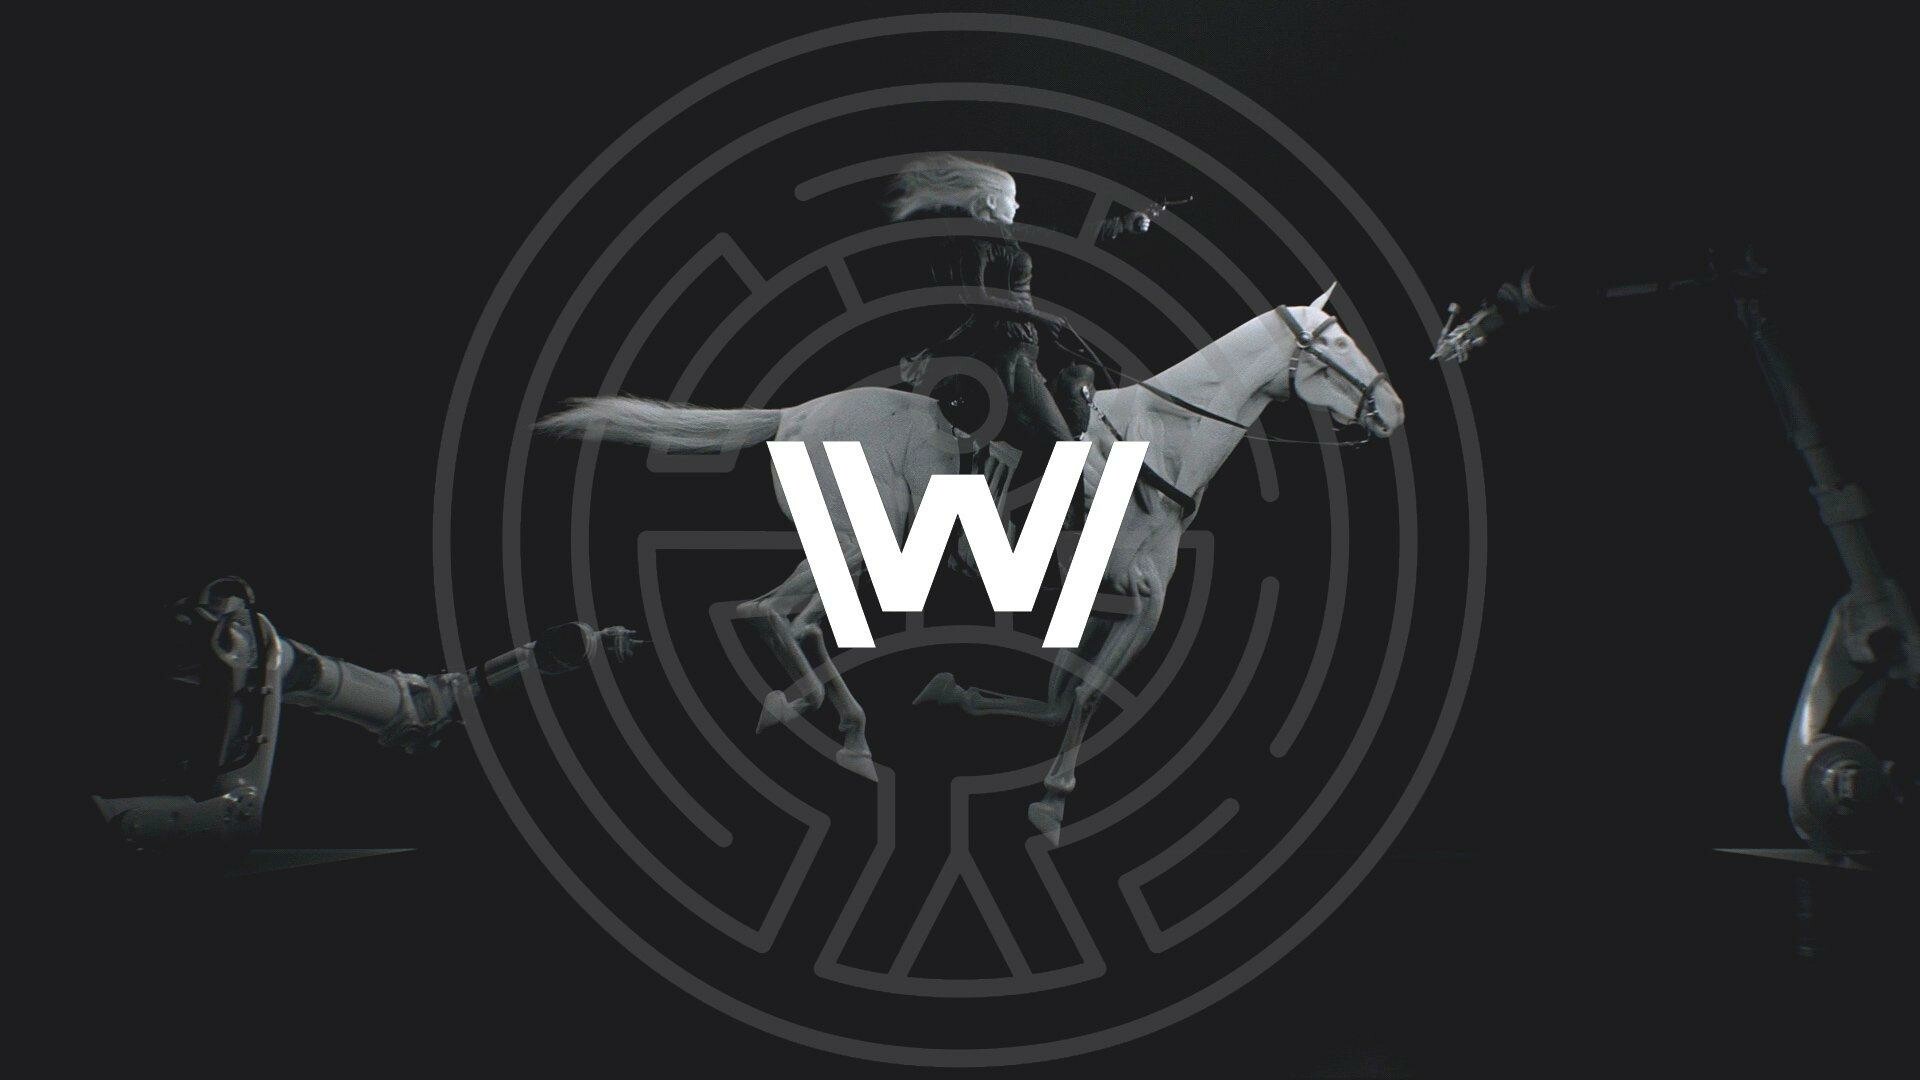 Westworld: A high-tech amusement park for adults with a Wild West theme, Sci-fi. 1920x1080 Full HD Wallpaper.